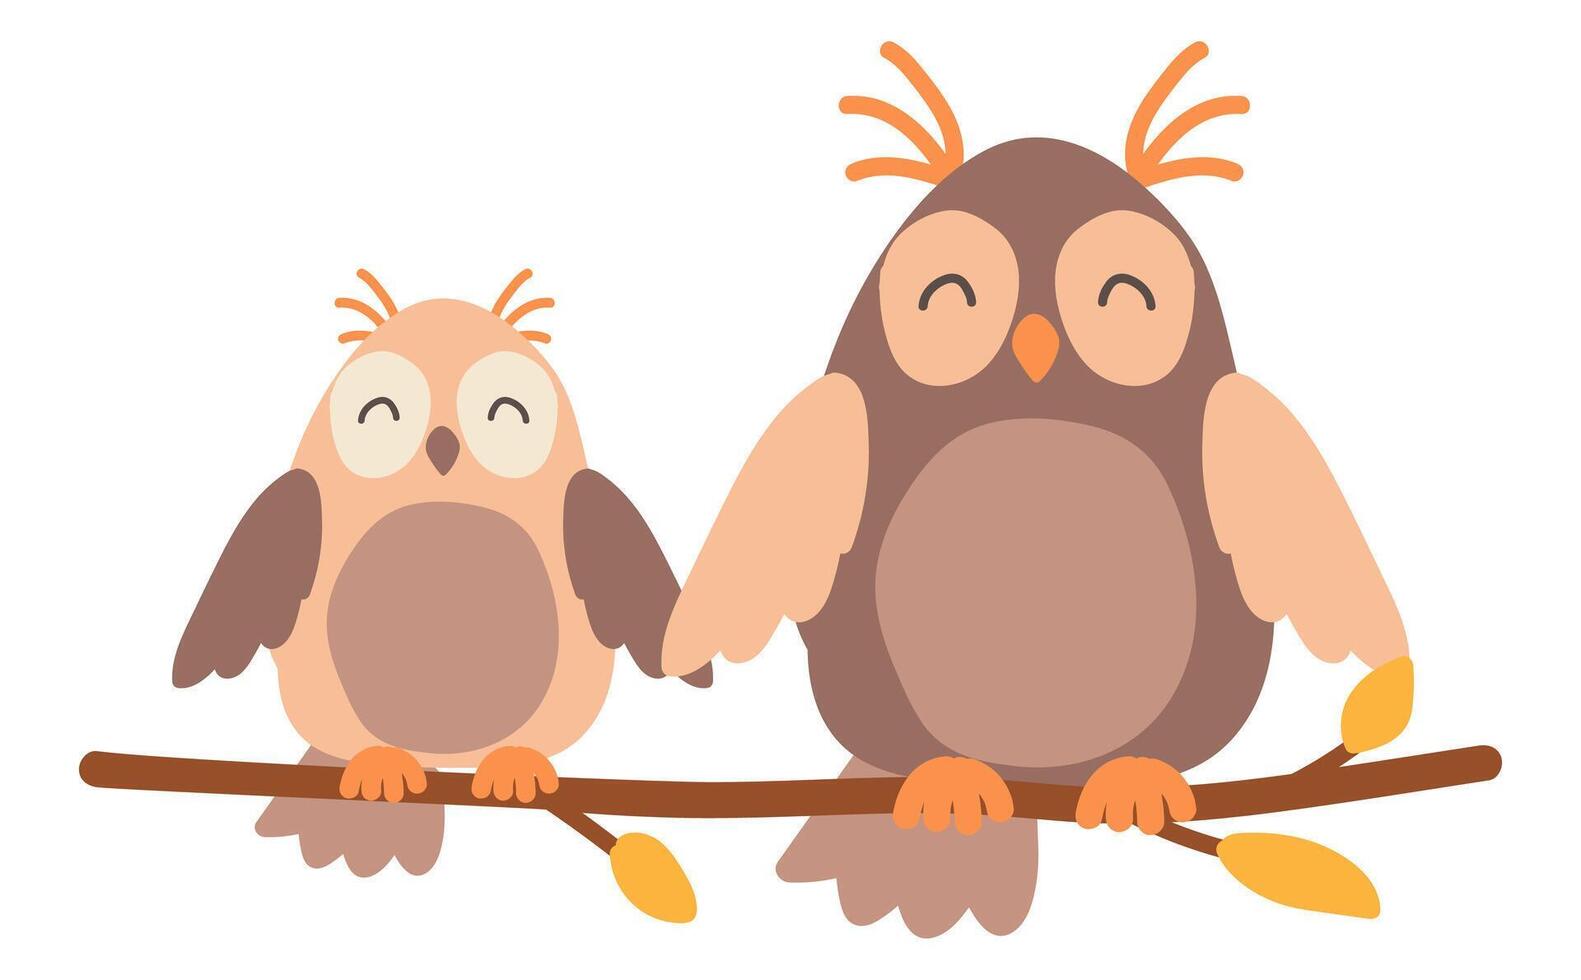 Cute owls on branch in flat design. Birds sits on twig with orange leaves. illustration isolated. vector